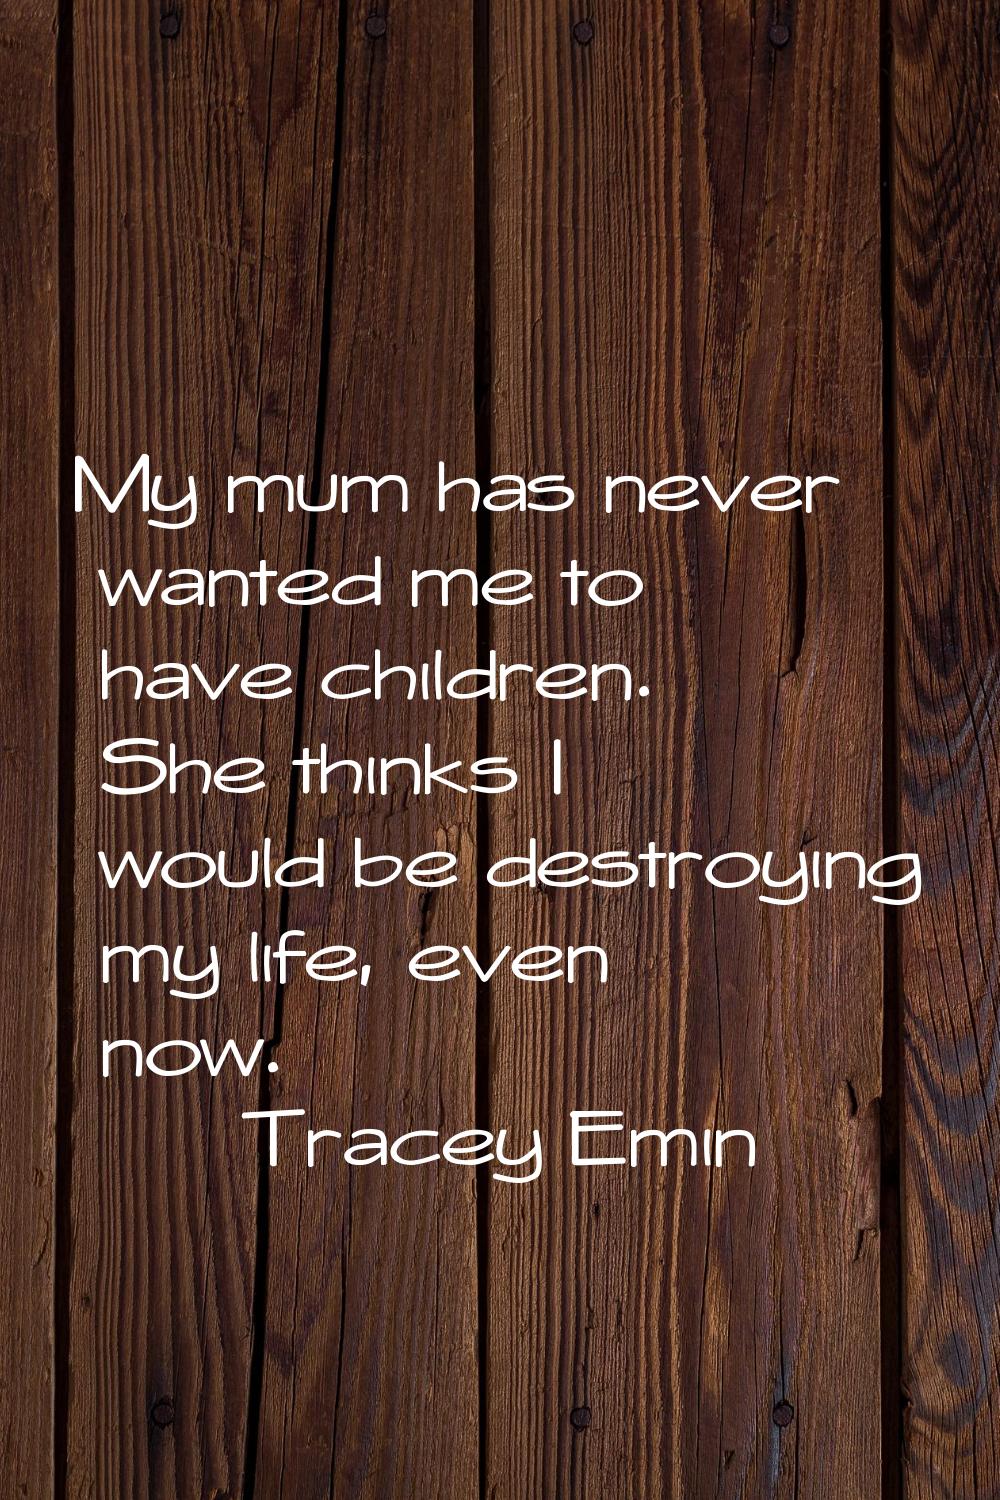 My mum has never wanted me to have children. She thinks I would be destroying my life, even now.